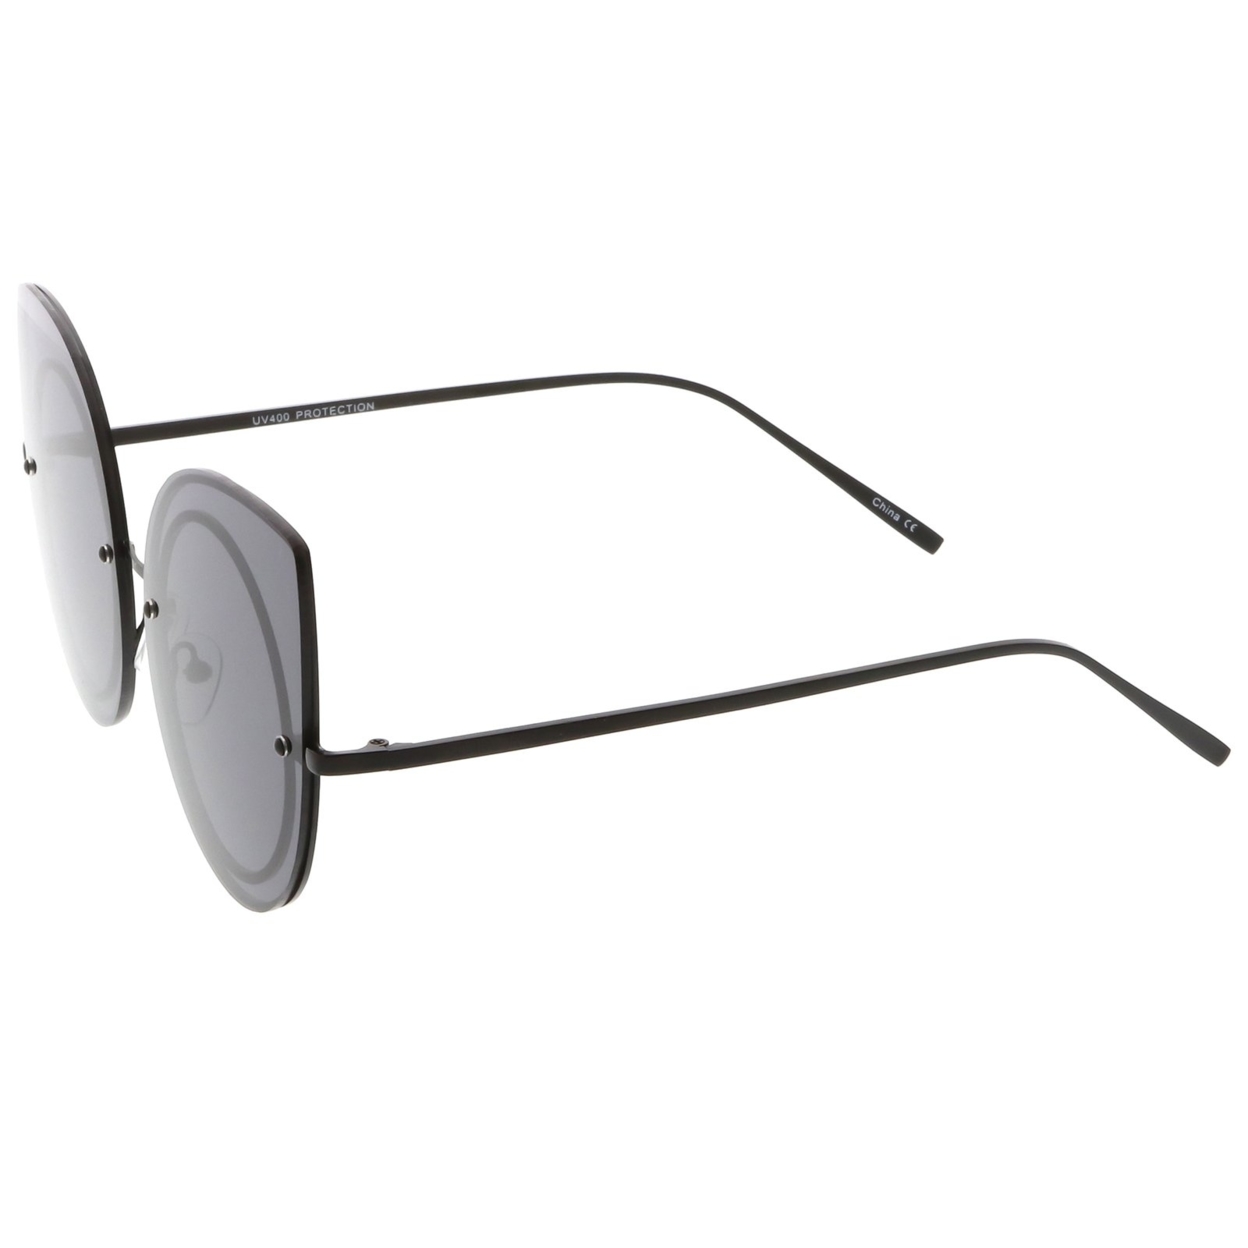 Oversize Rimless Cat Eye Sunglasses With Neutral Color Flat Lens Slim Arms 64mm - Silver / Smoke